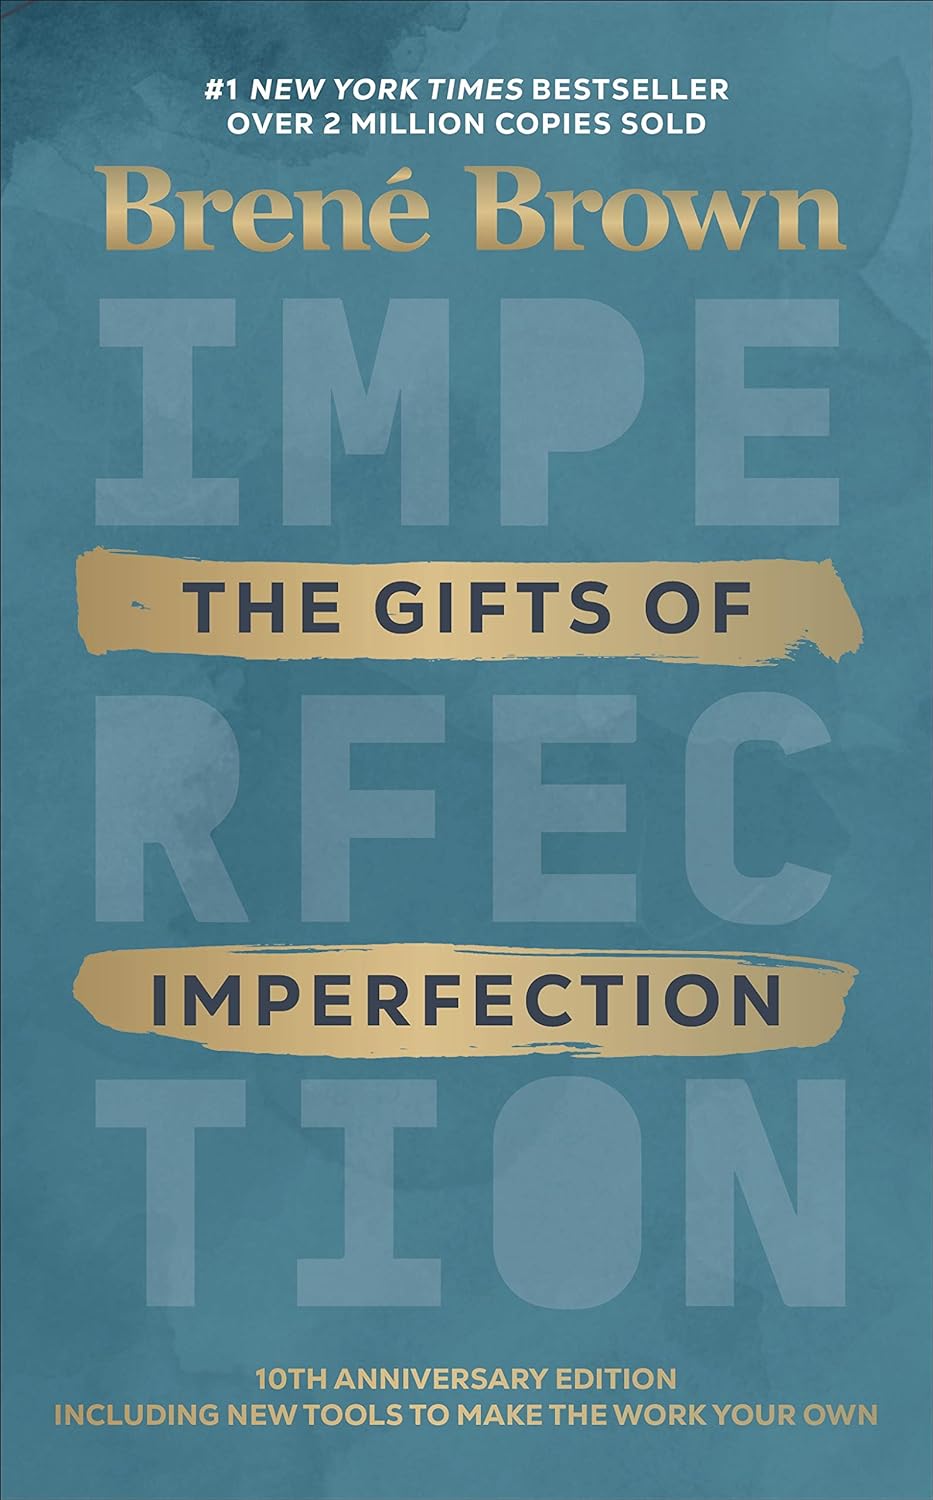 The Gifts of Imperfection - The Delight of Surprising Yourself